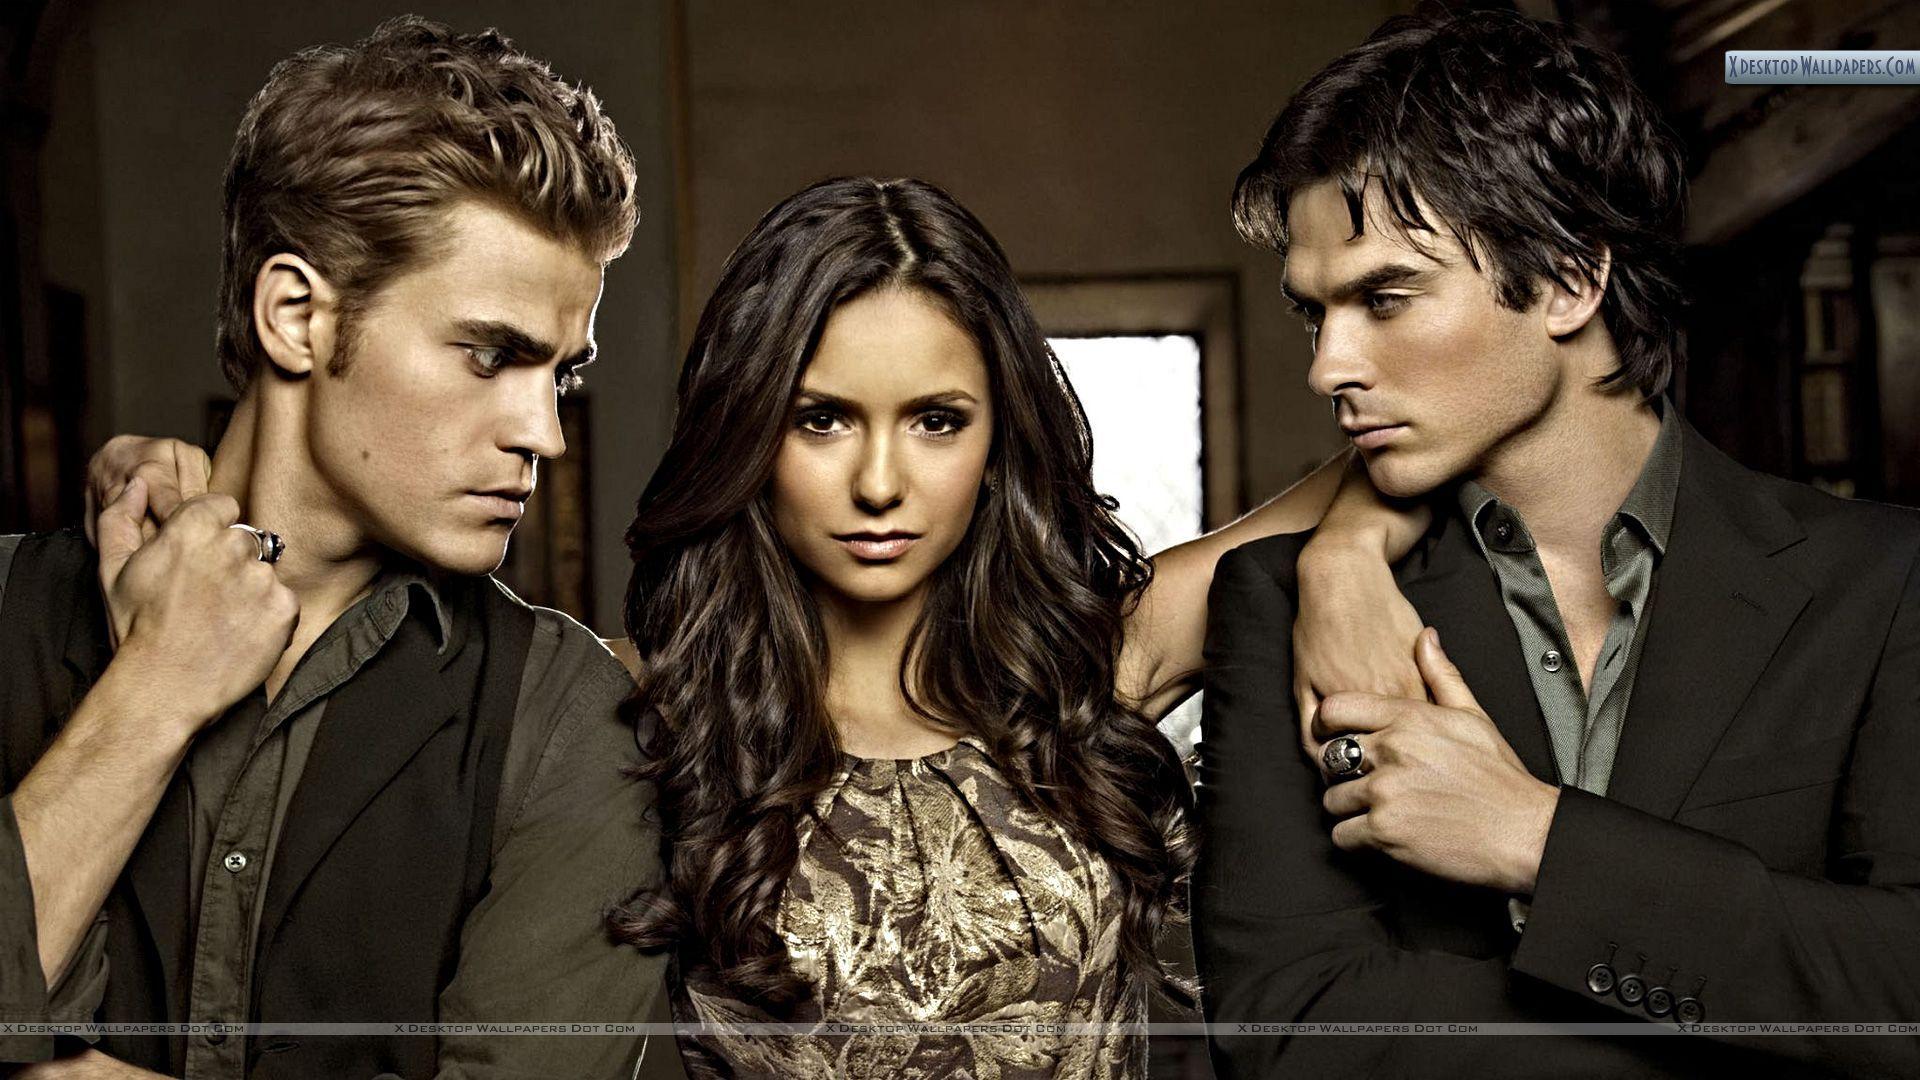 The Vampire Diaries Damon and Stefan HD Wallpaper, Background Image